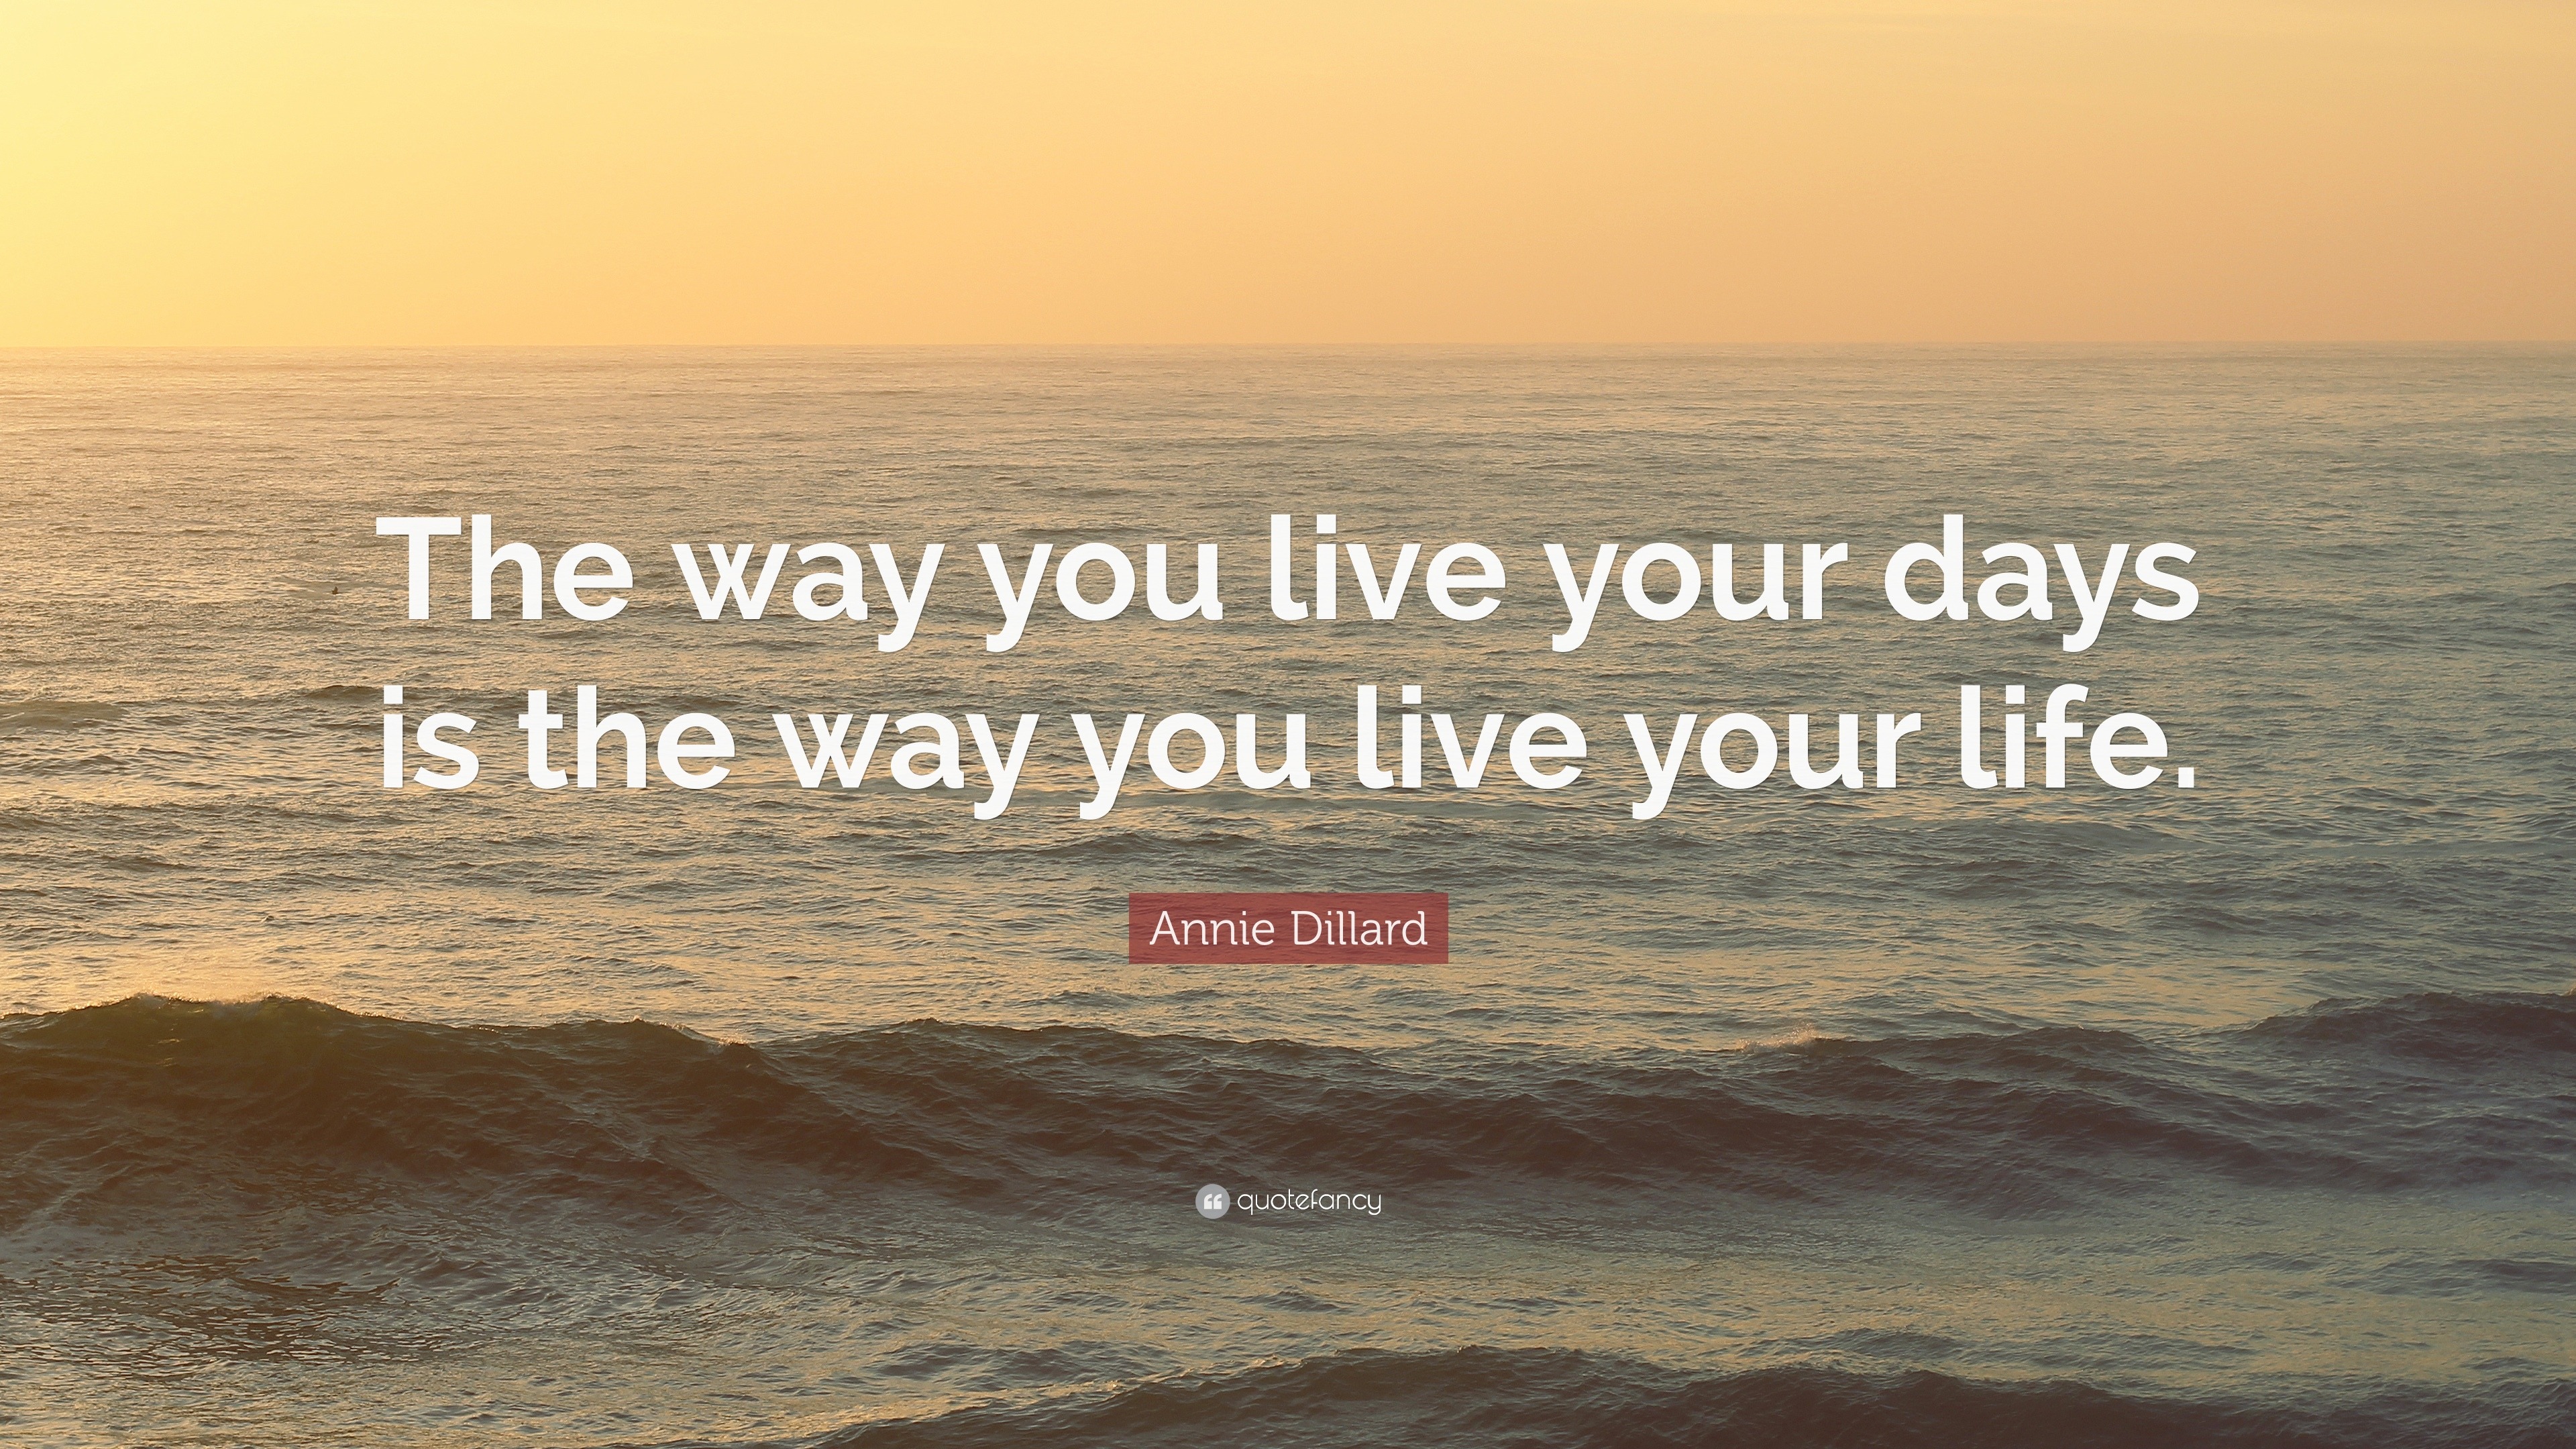 Annie Dillard Quote “The way you live your days is the way you live